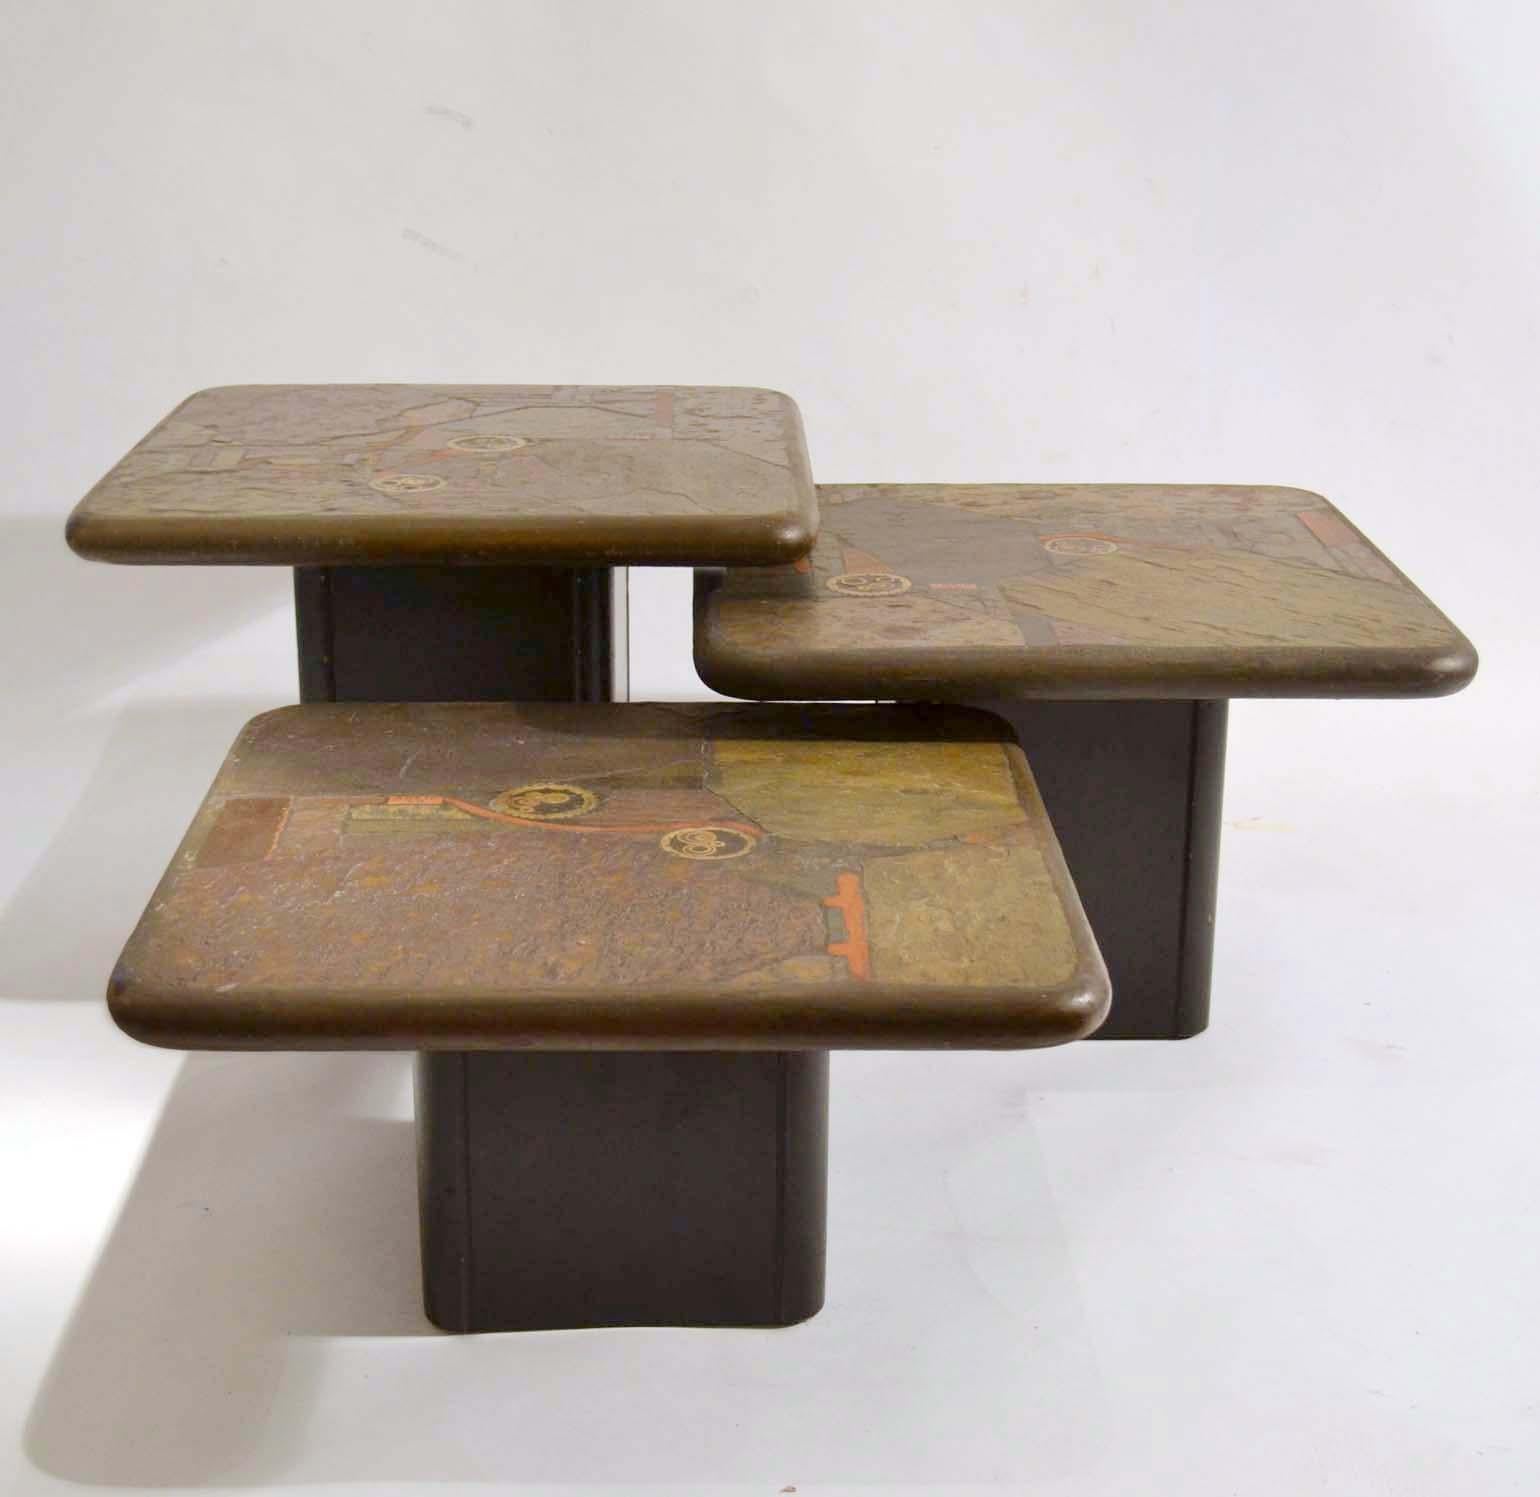 Hand-Crafted Brutalist Mosaic Coffee Tables by Paul Kingma, Kneip 1989